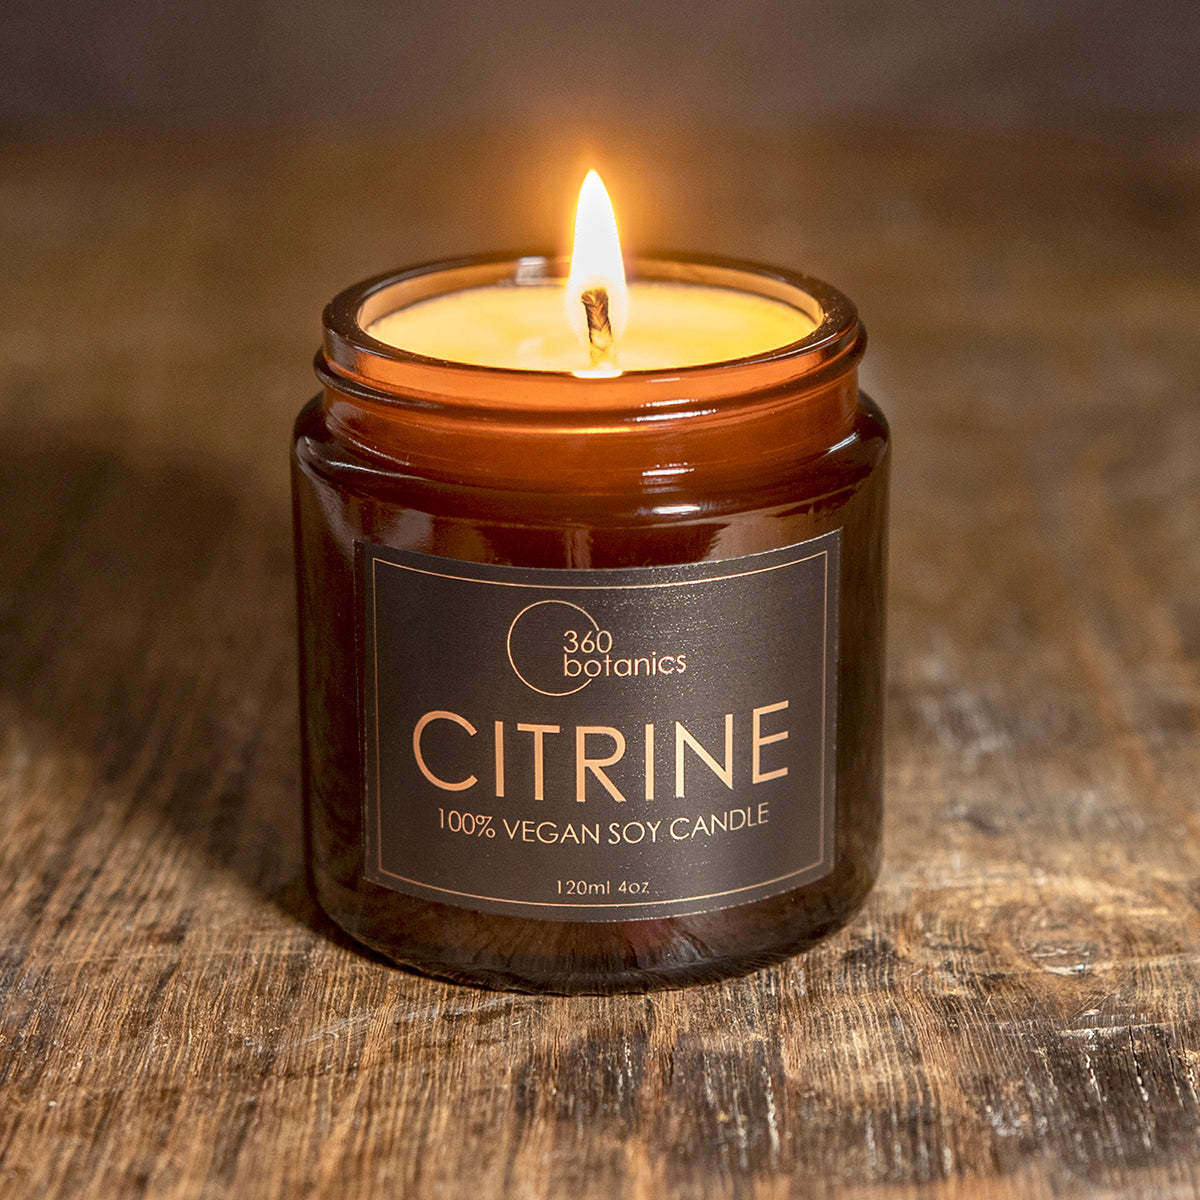 A lit 360 Botanics Citrine 100% vegan soy candle in a brown glass jar, with a glowing flame, placed on a rustic wooden surface.